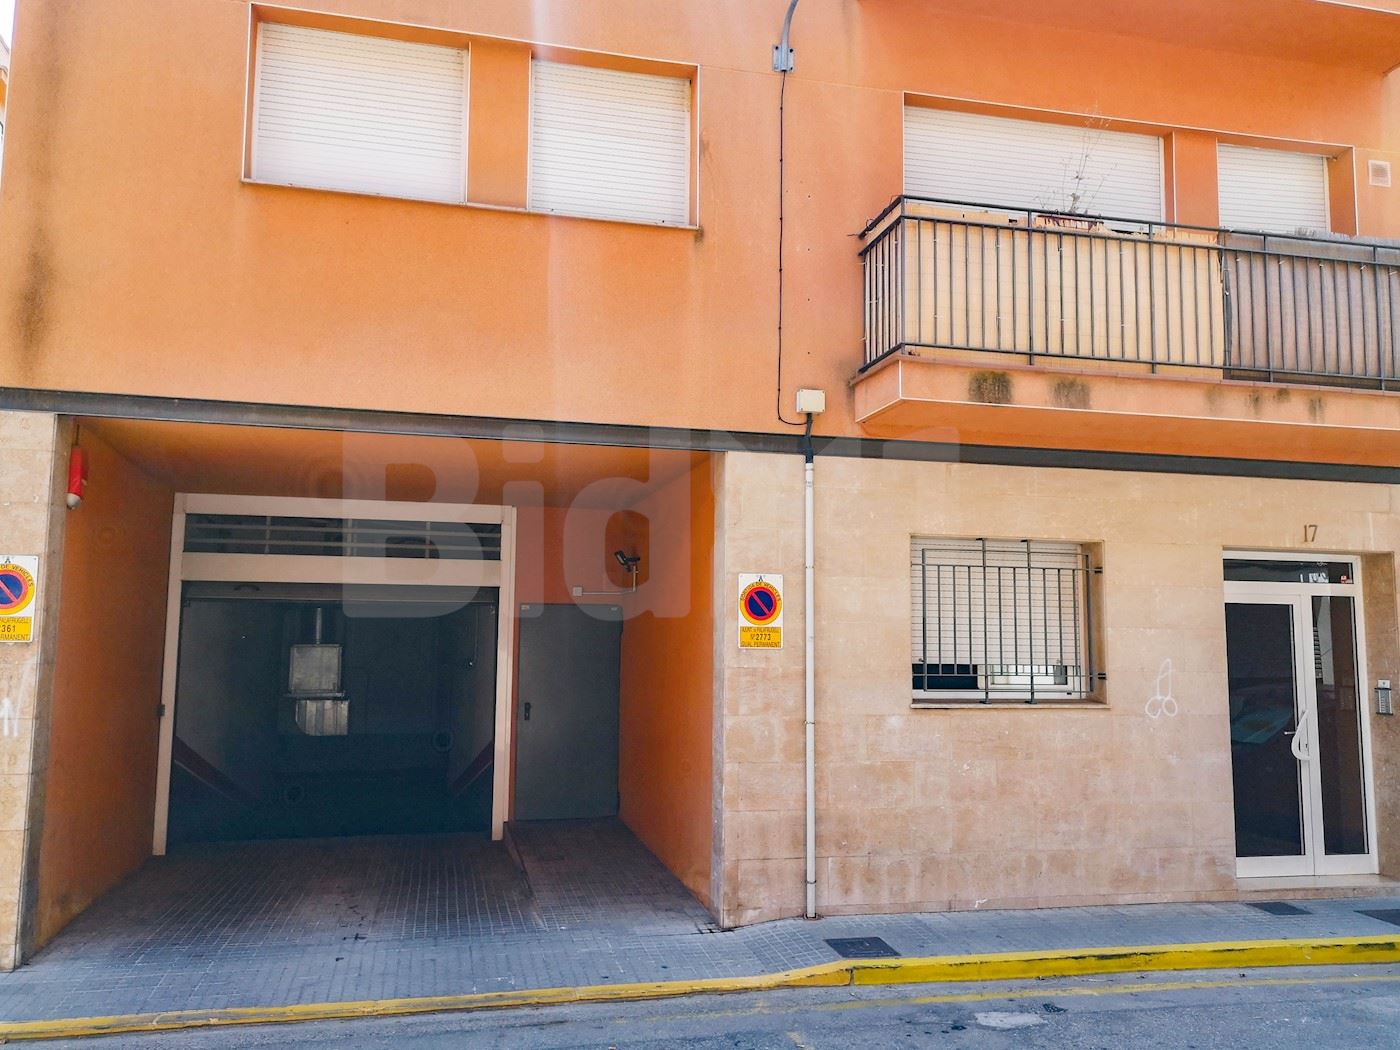 Calle Sant Pere, Palafrugell, Girona 1/8